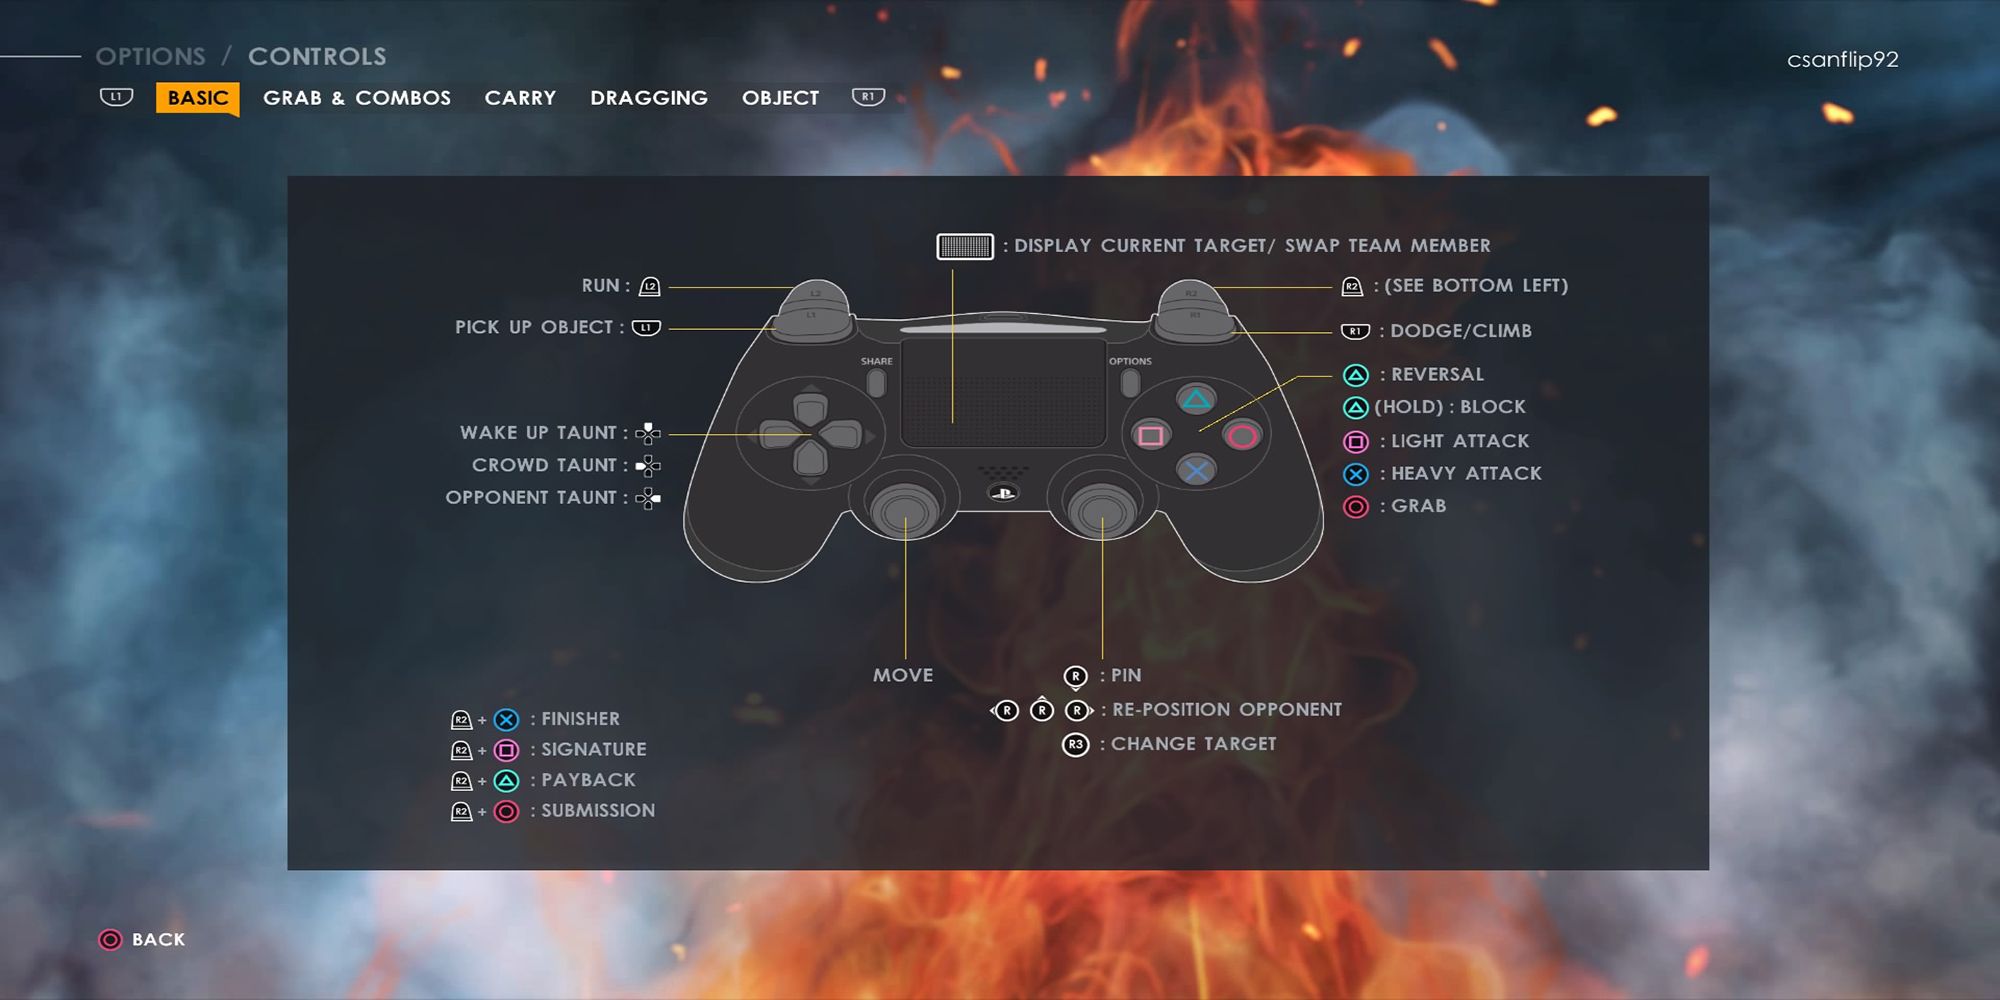 The Basic control layout of WWE 2K22 in the game's Options menu.